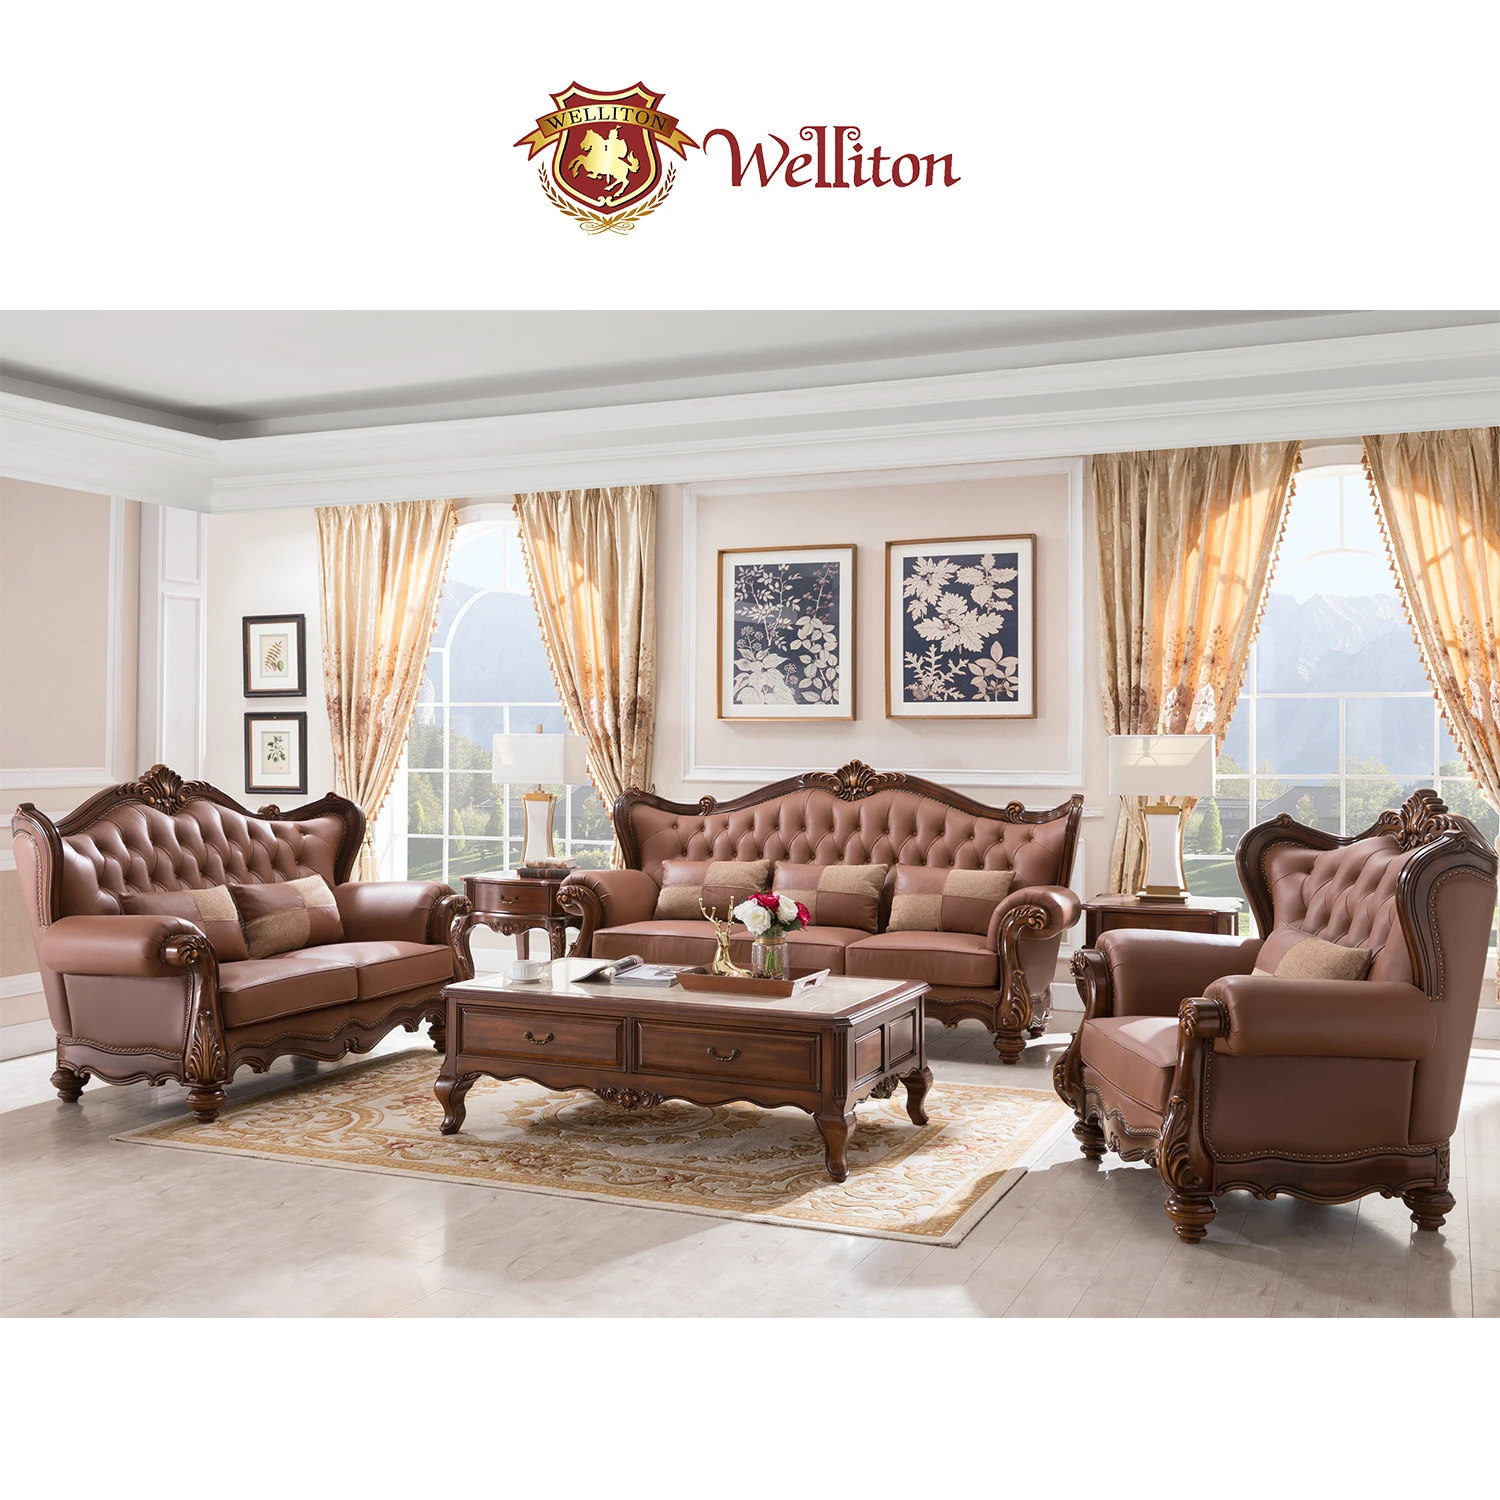 Welliton   leather sofa sets Living room Modern Therr-seat small Aparment X603-19 Luxury Sectional sofa Design Furniture